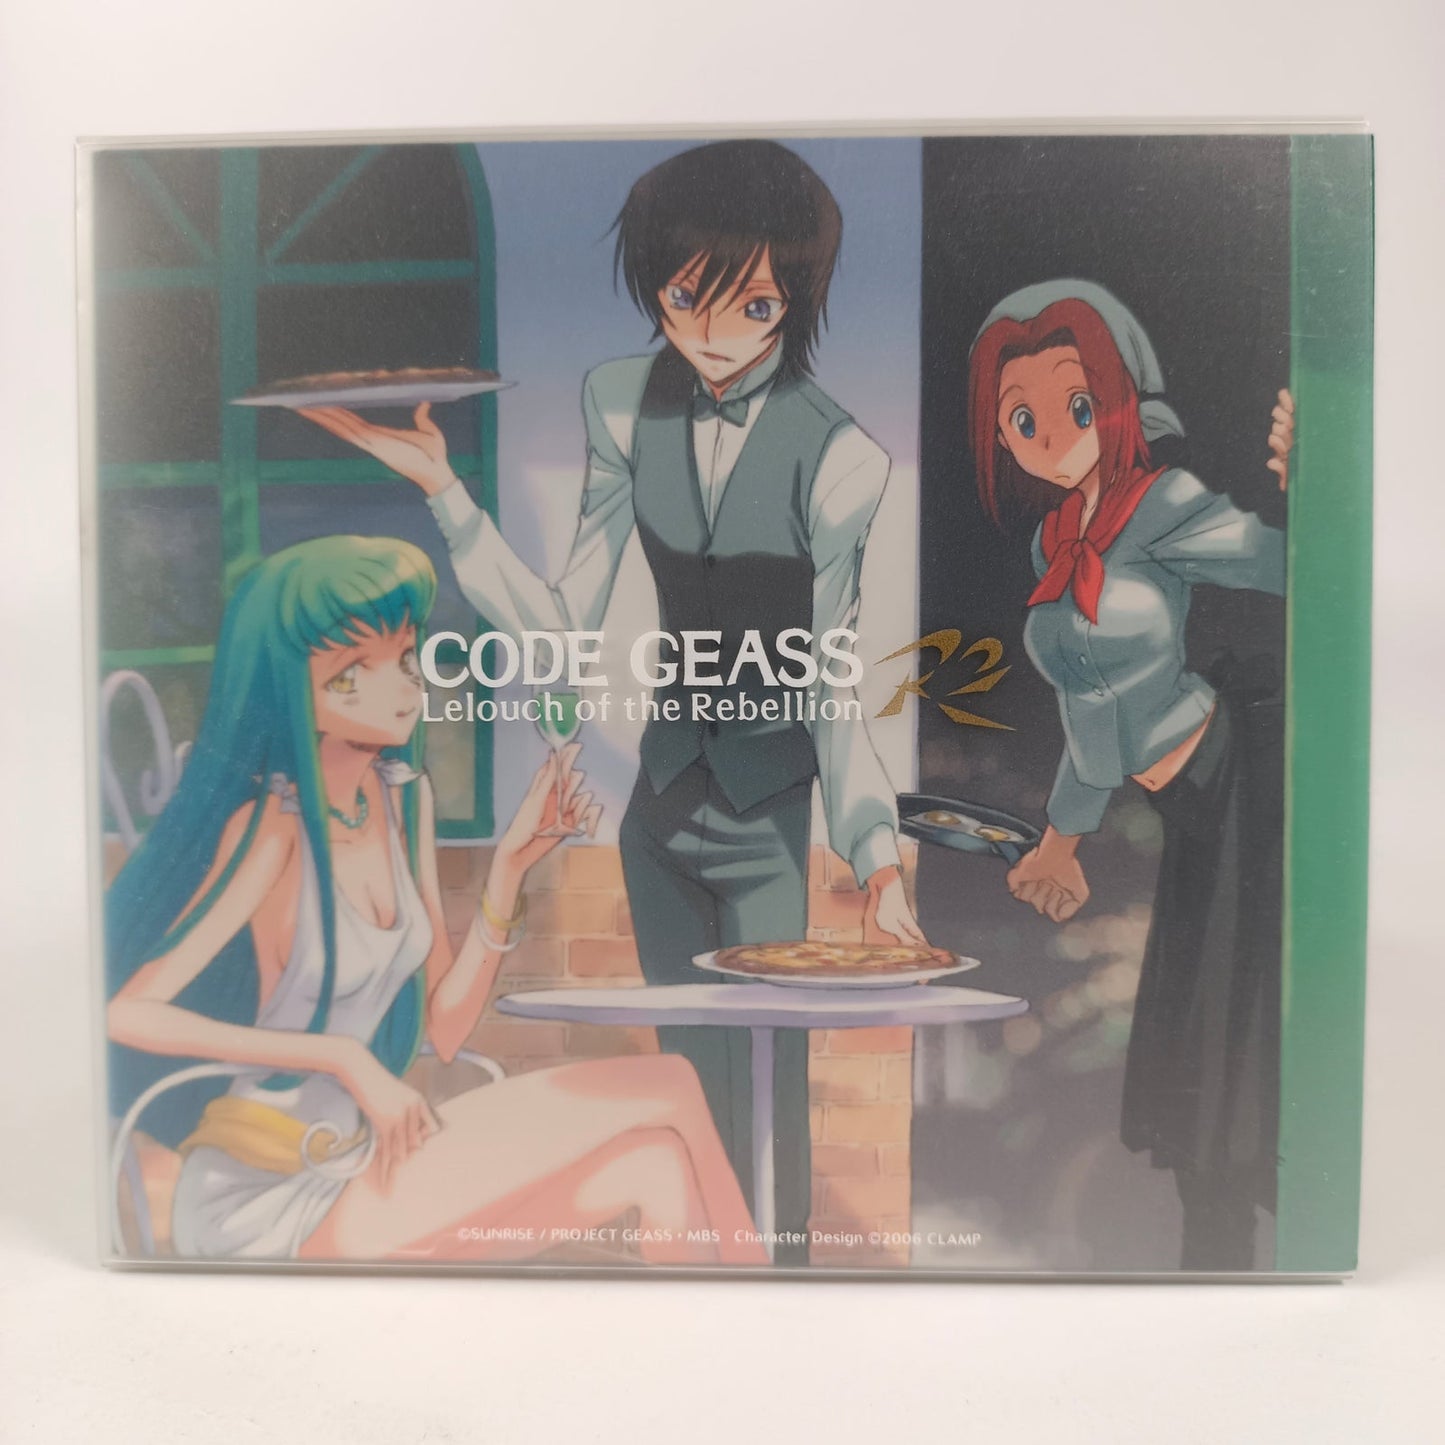 CODE GEASS Lelouch of the Rebellion Sound Episode 1